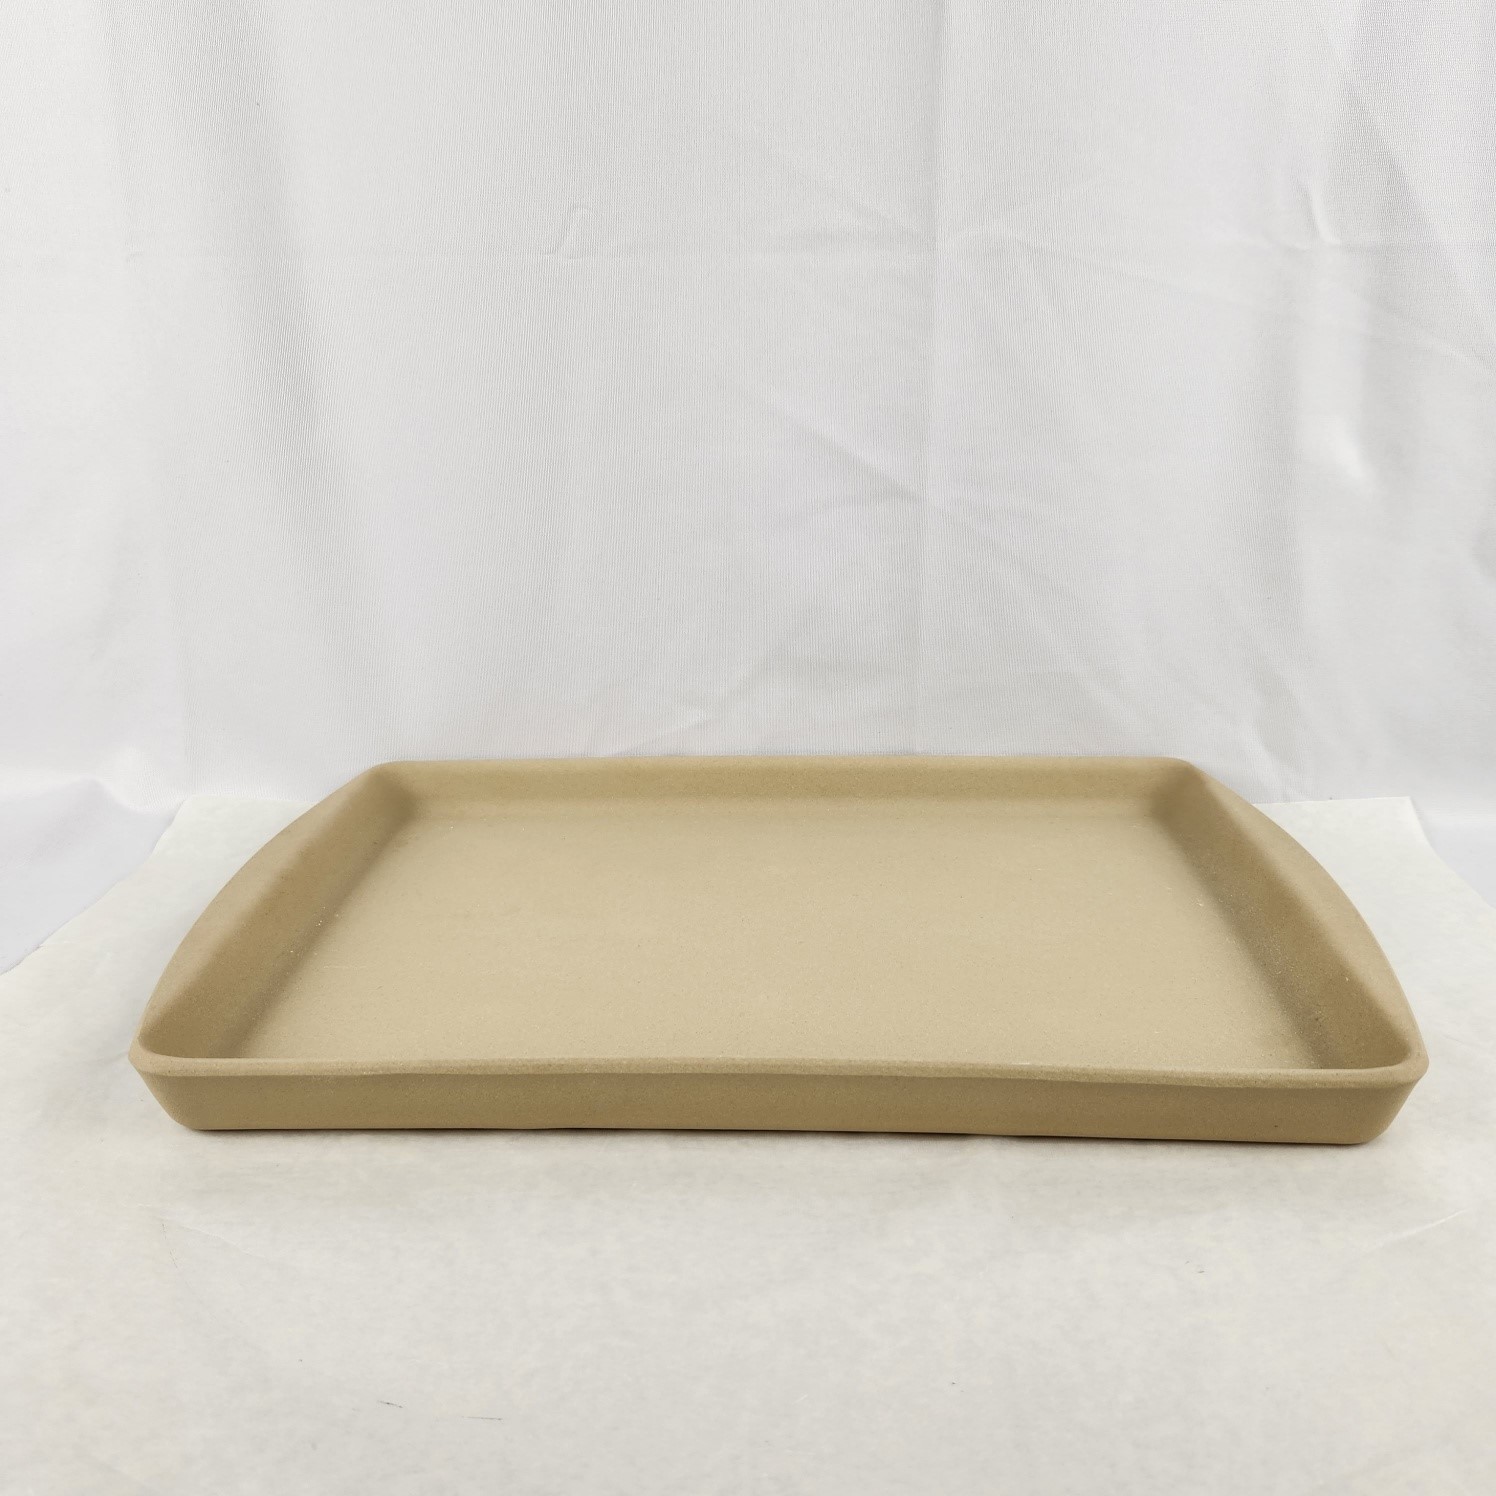 Pampered Chef #100221 - Stone Loaf Pan - appears to be new in box -  Northern Kentucky Auction, LLC